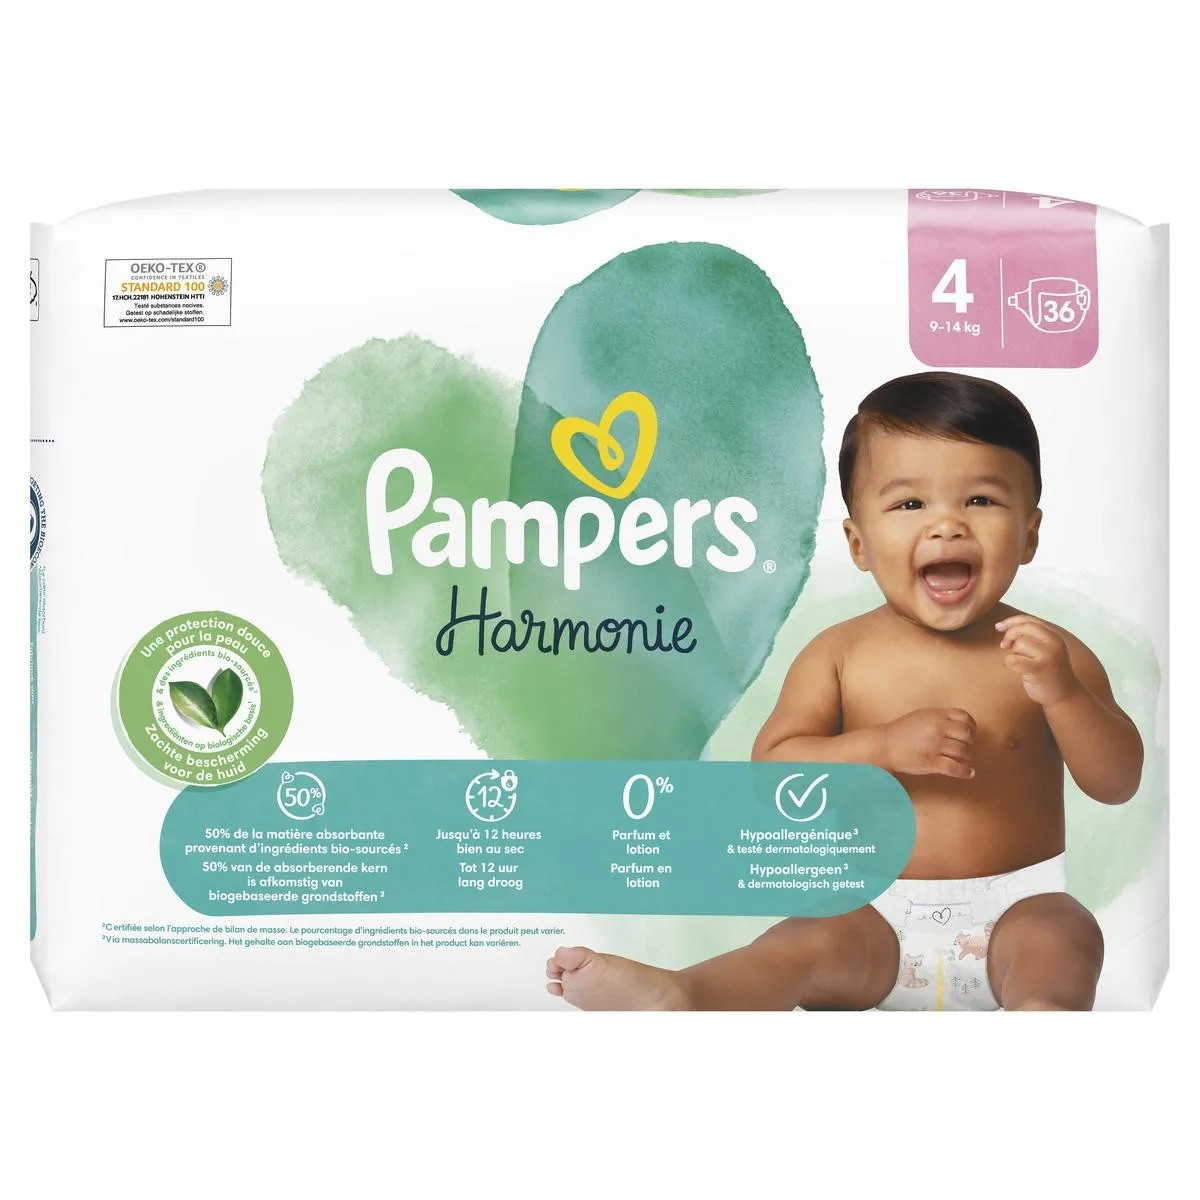 Pampers Harmonie Couches Hypoallergéniques, Taille